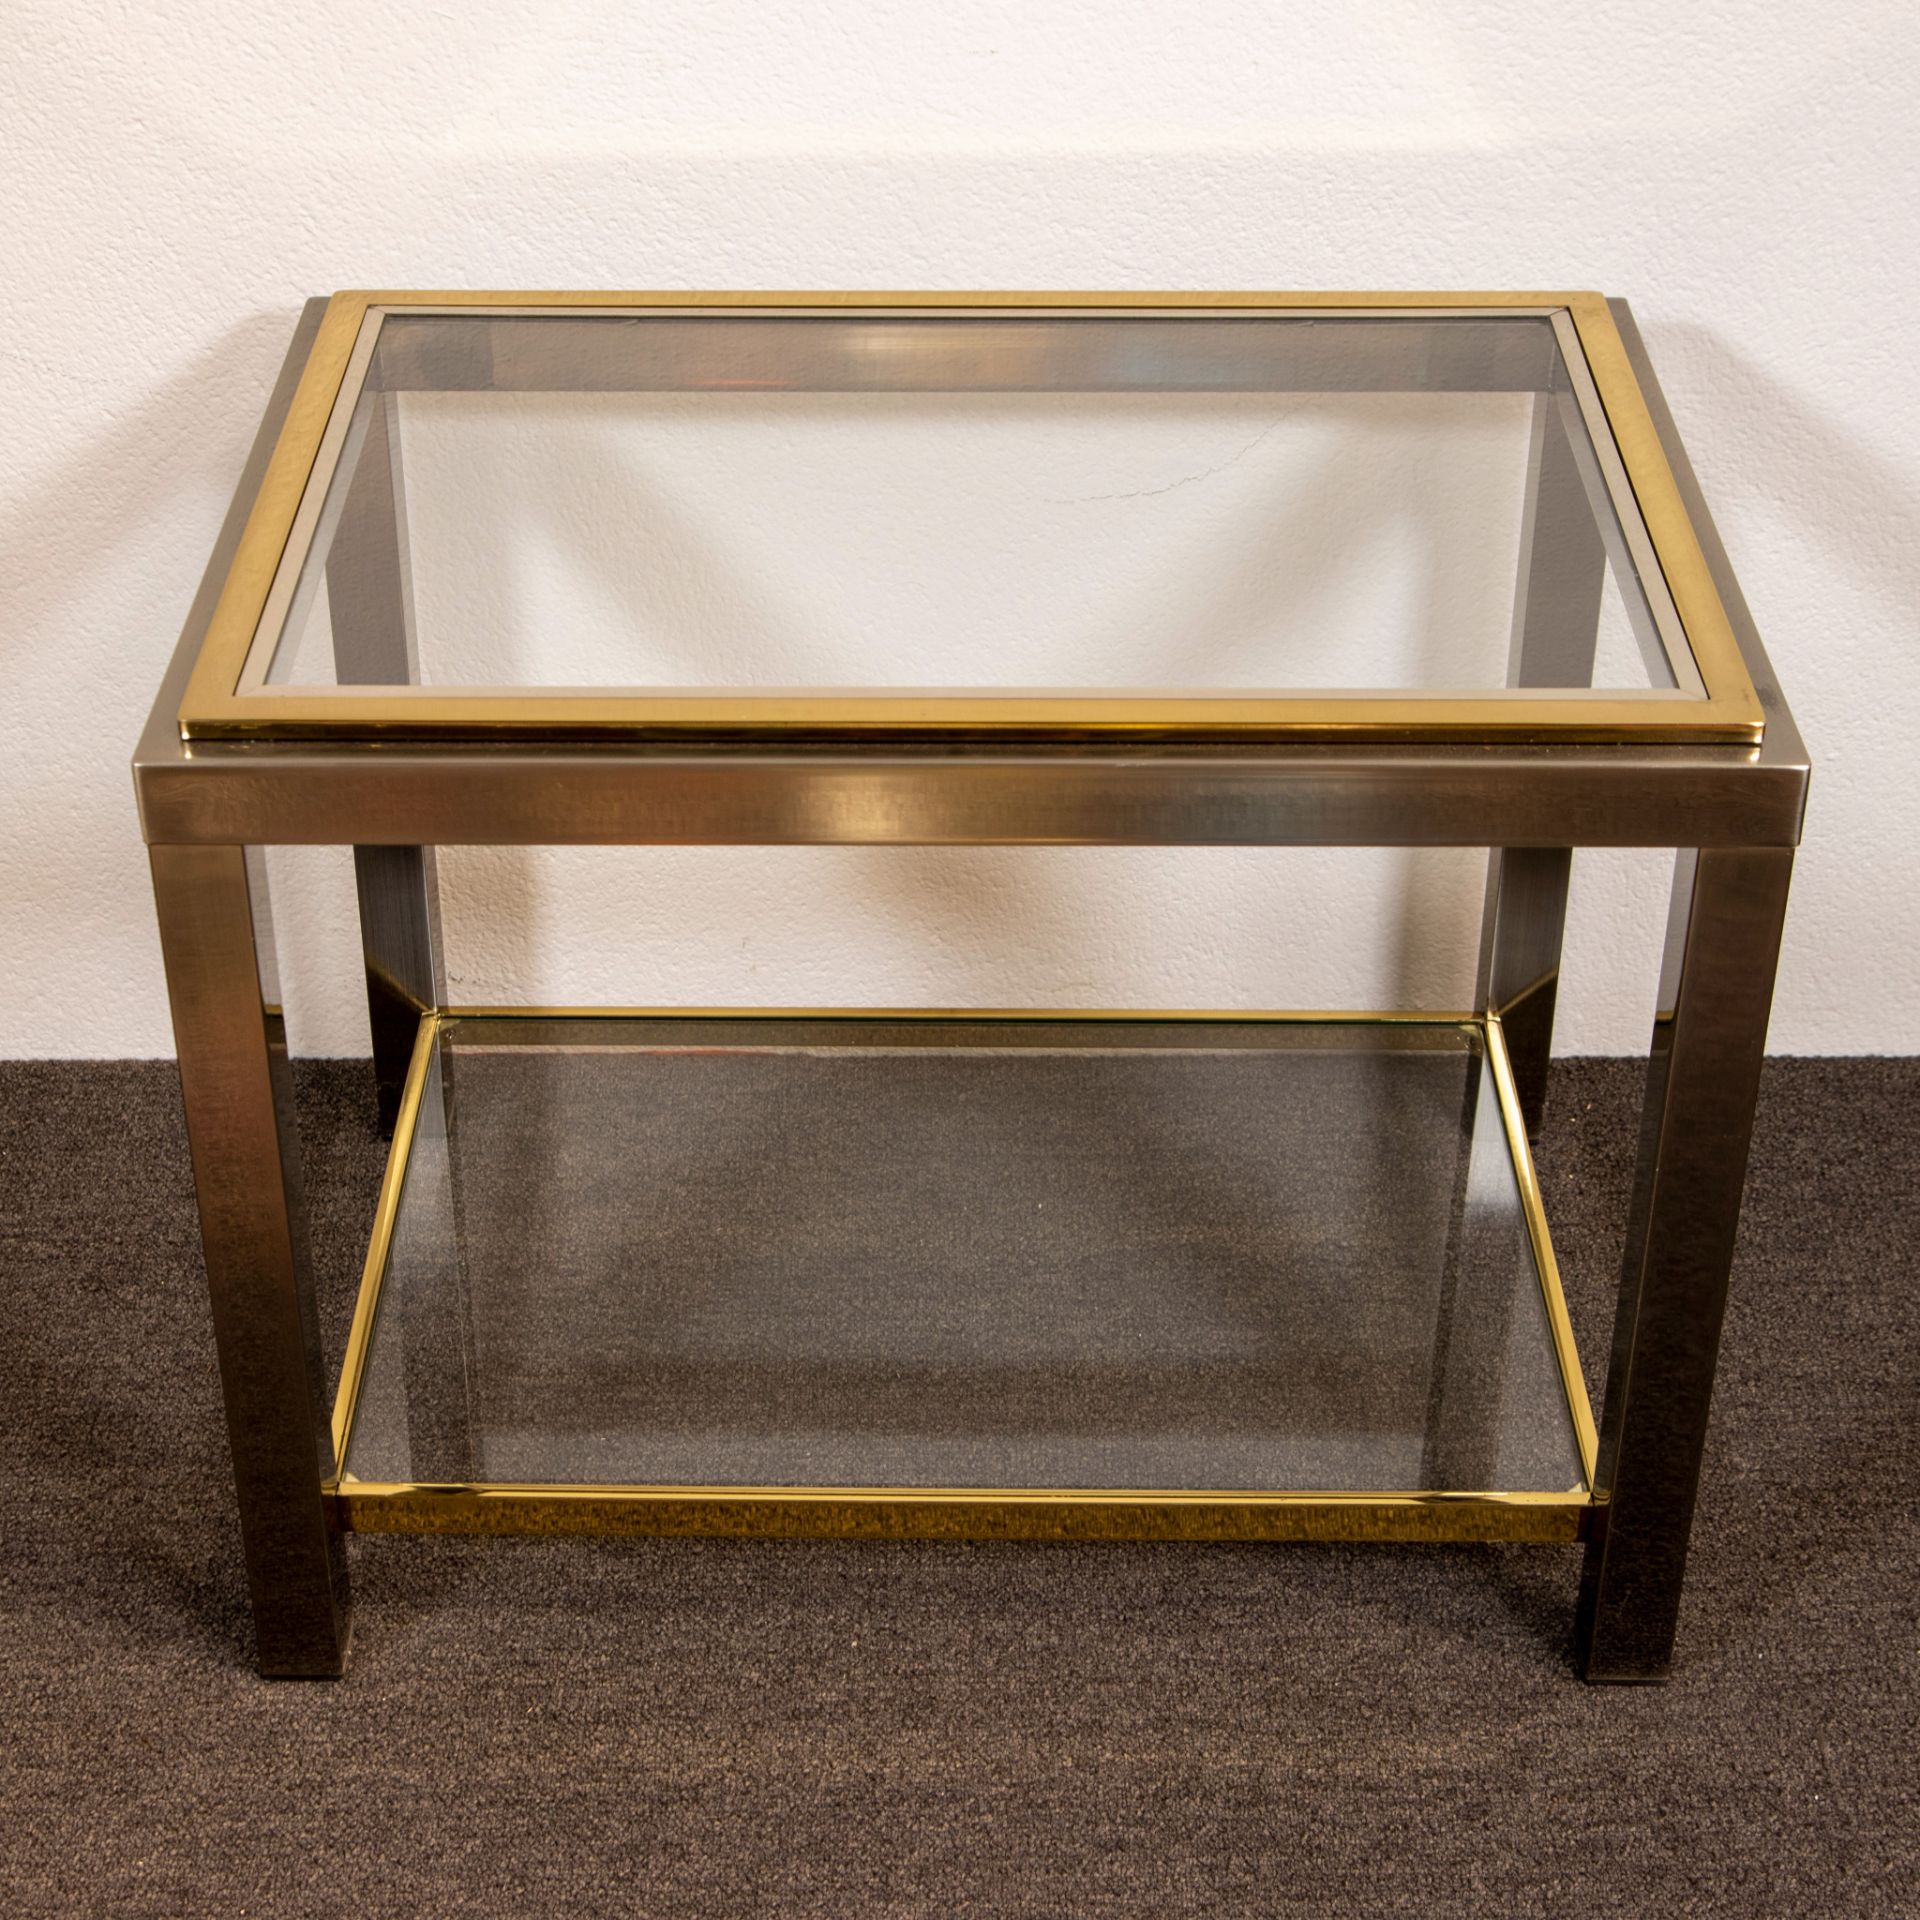 2 Belgo Chrom side tables, steel and brass with clear glass - Bild 3 aus 3